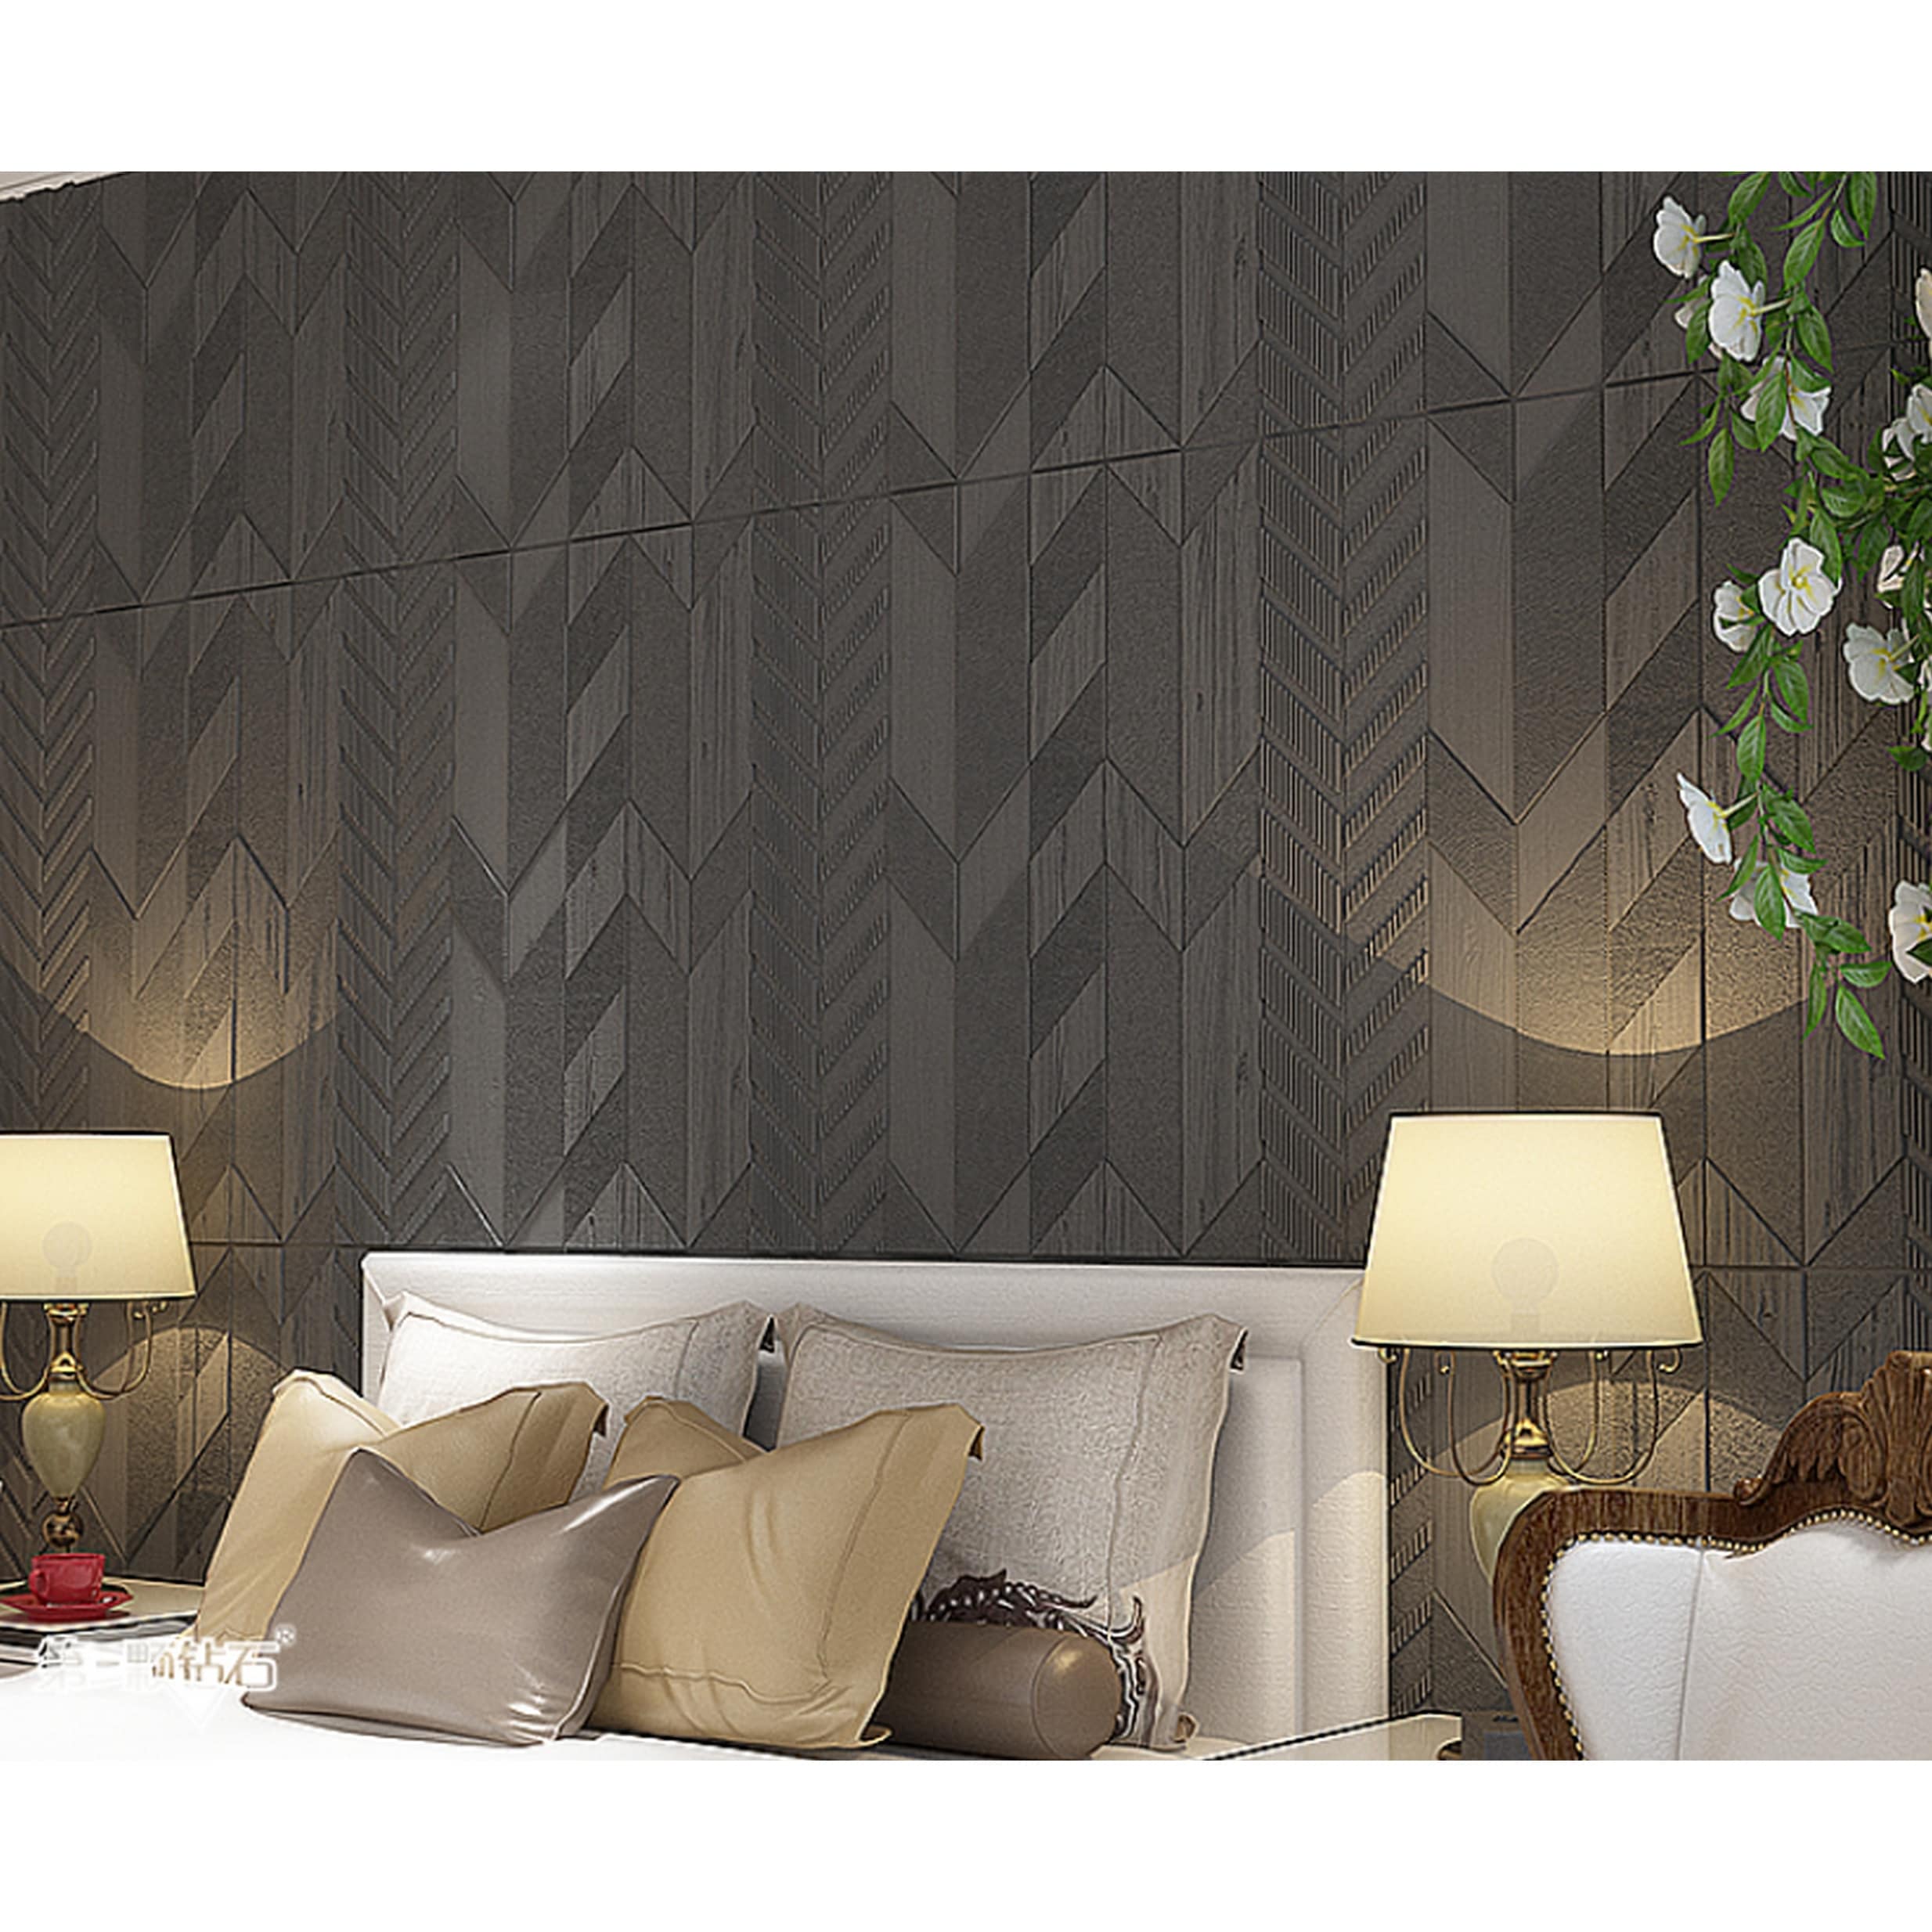 1 pcs 3D Wallpaper Wall Panel Peel Stick Adhesive Bedroom Background Home 